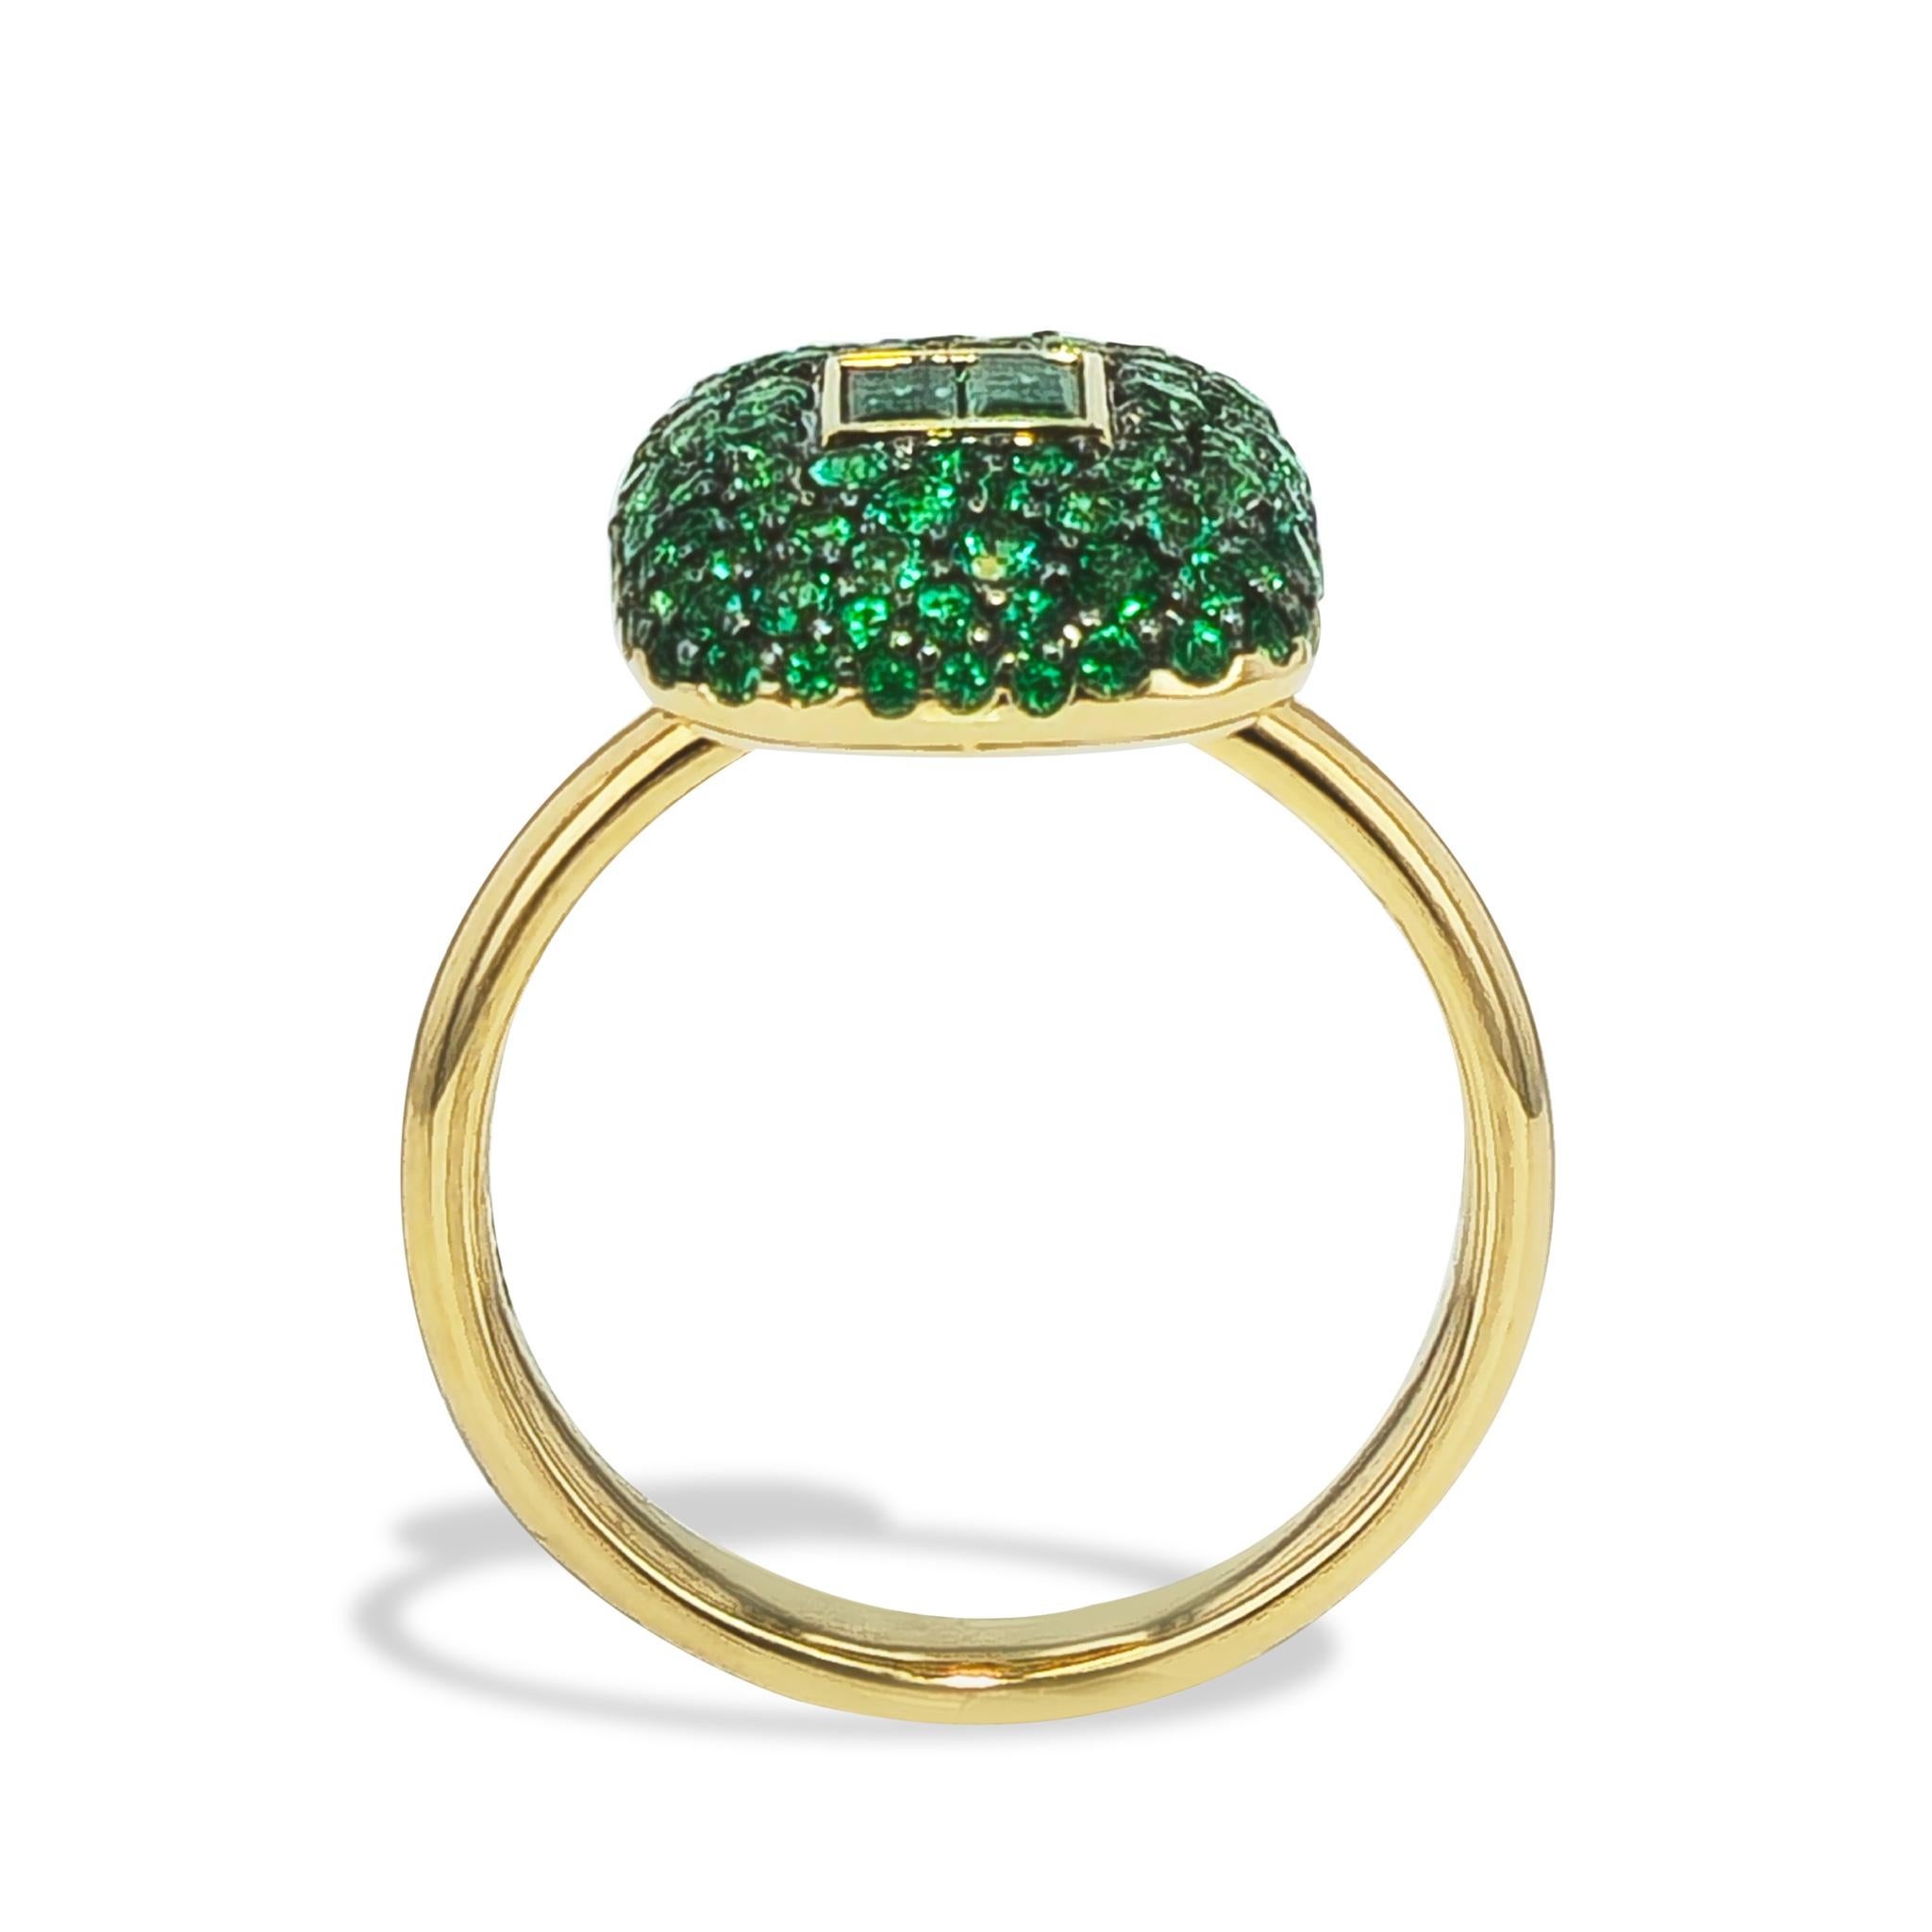 1.11 Carat Pave Emerald Cocktail Ring 18 Karat Yellow Gold  In New Condition For Sale In Miami, FL